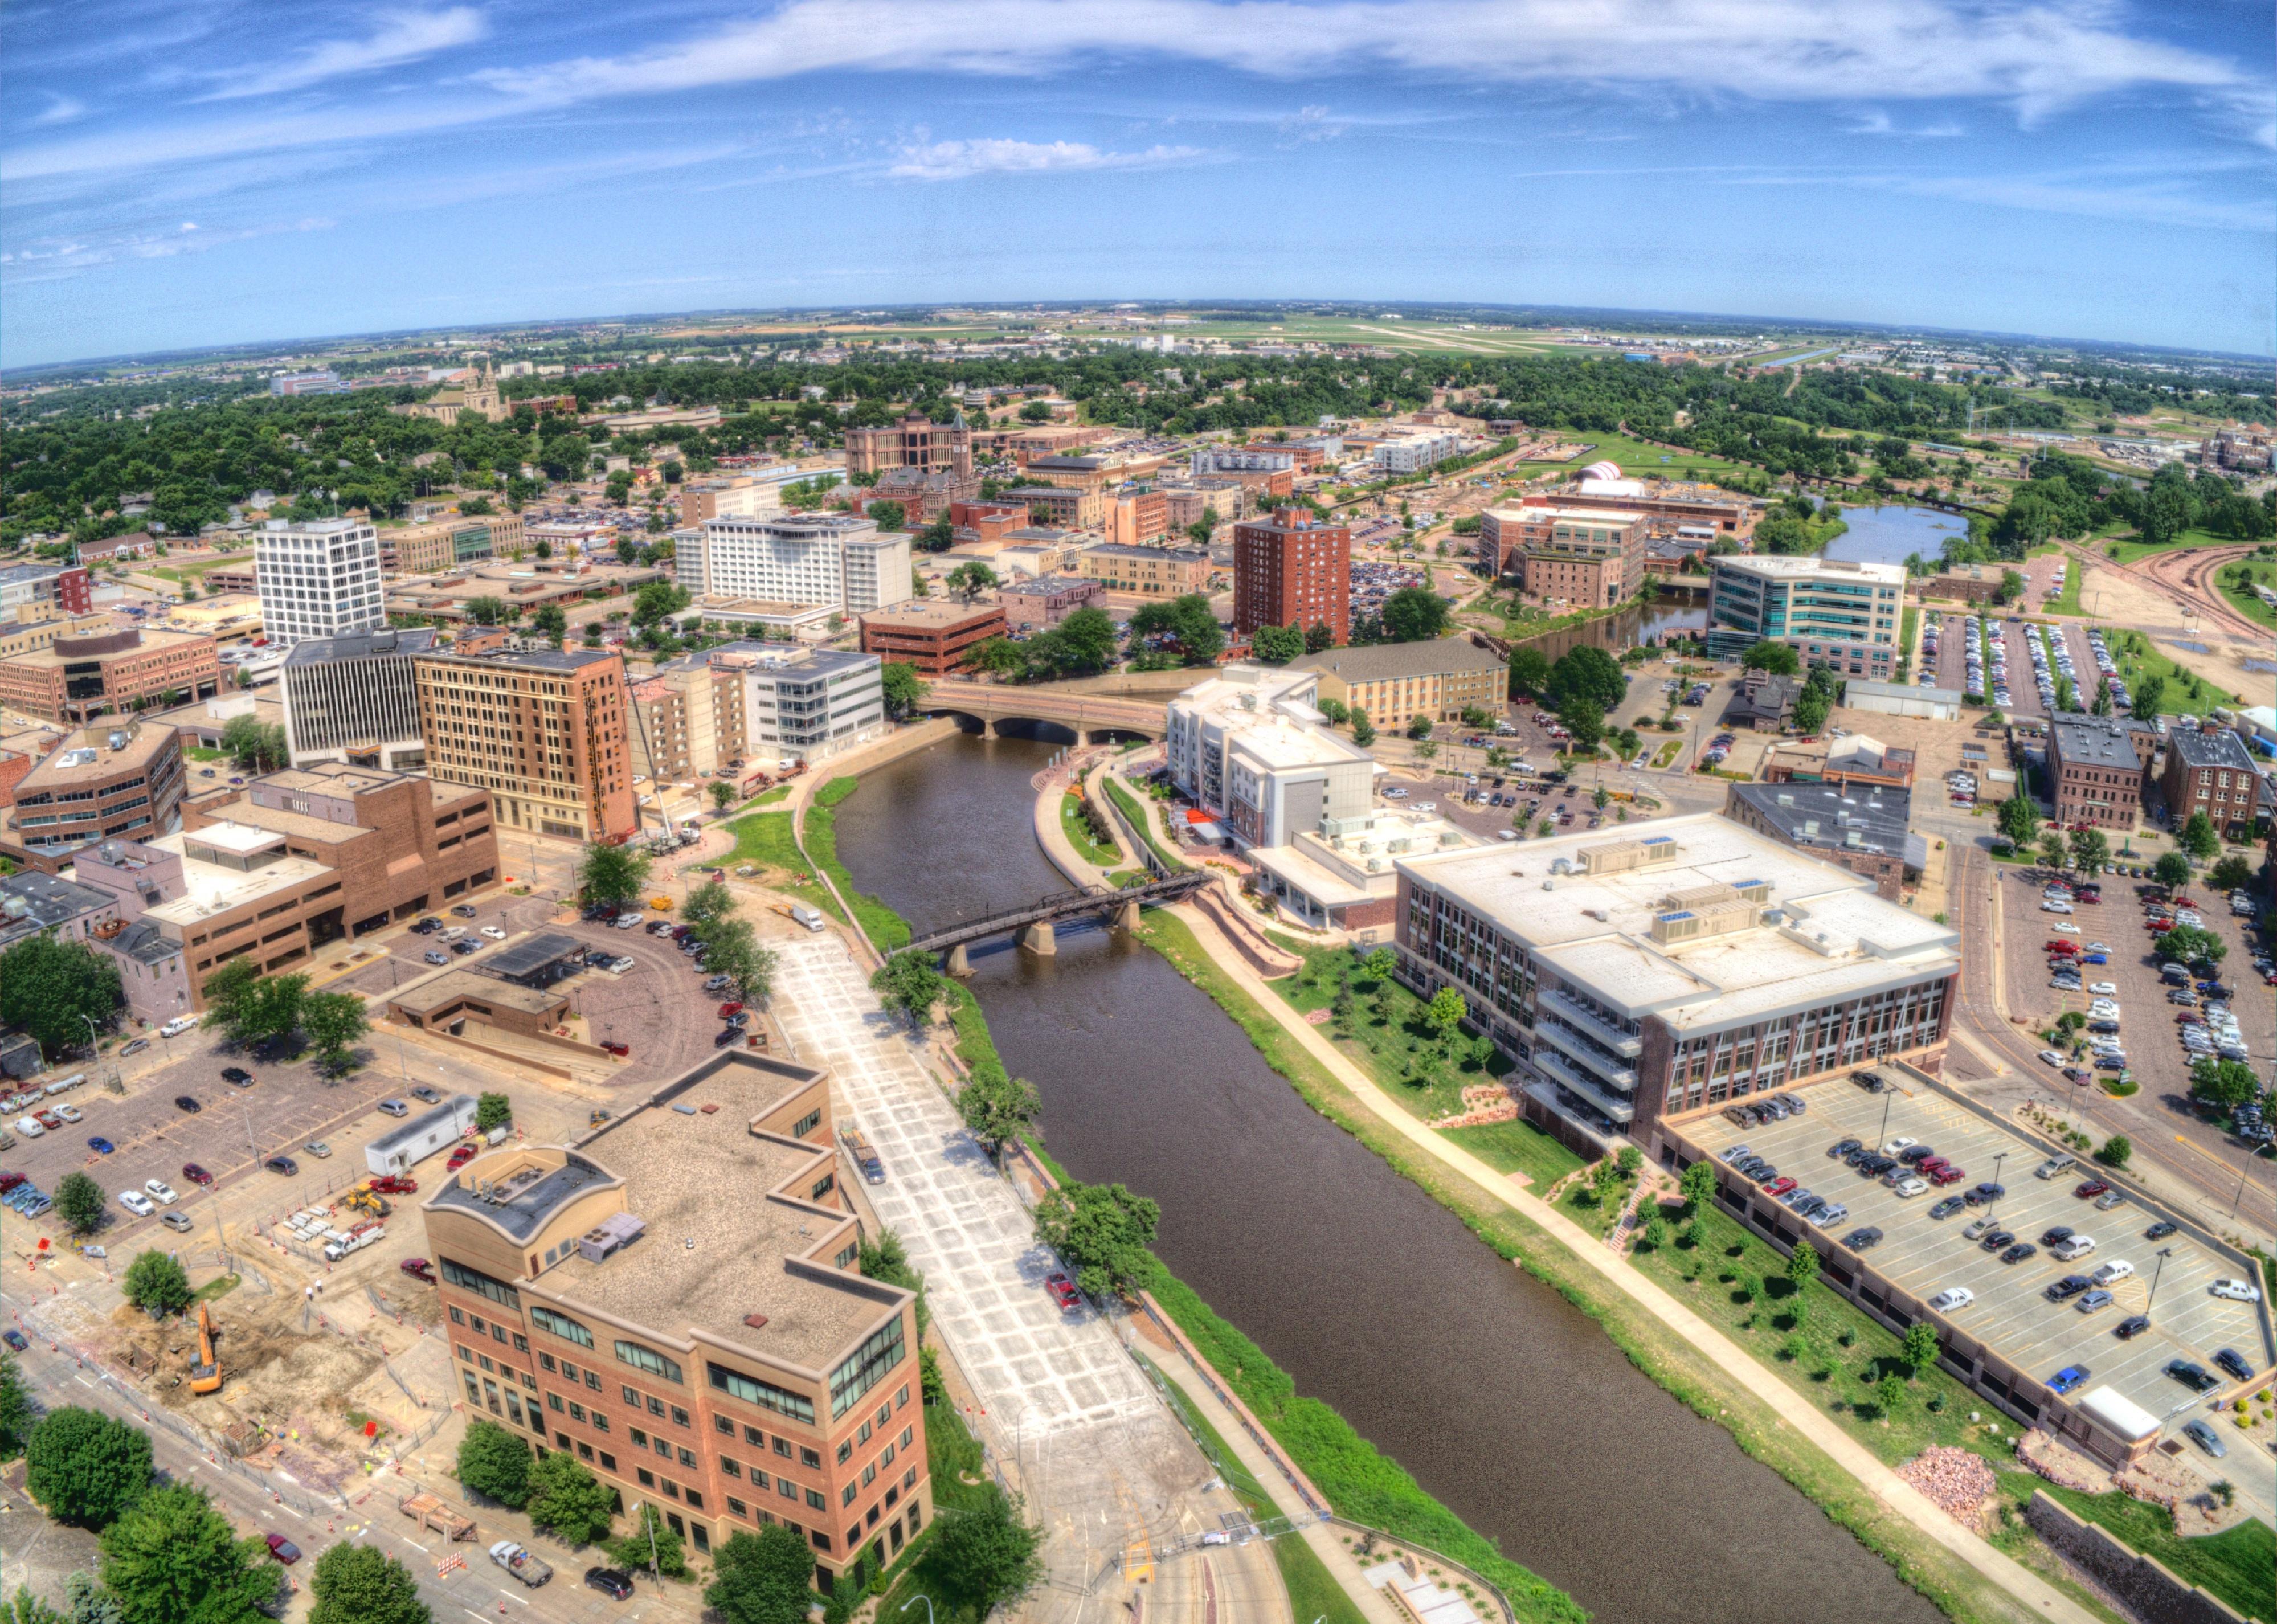 Summer aerial view of Sioux Falls